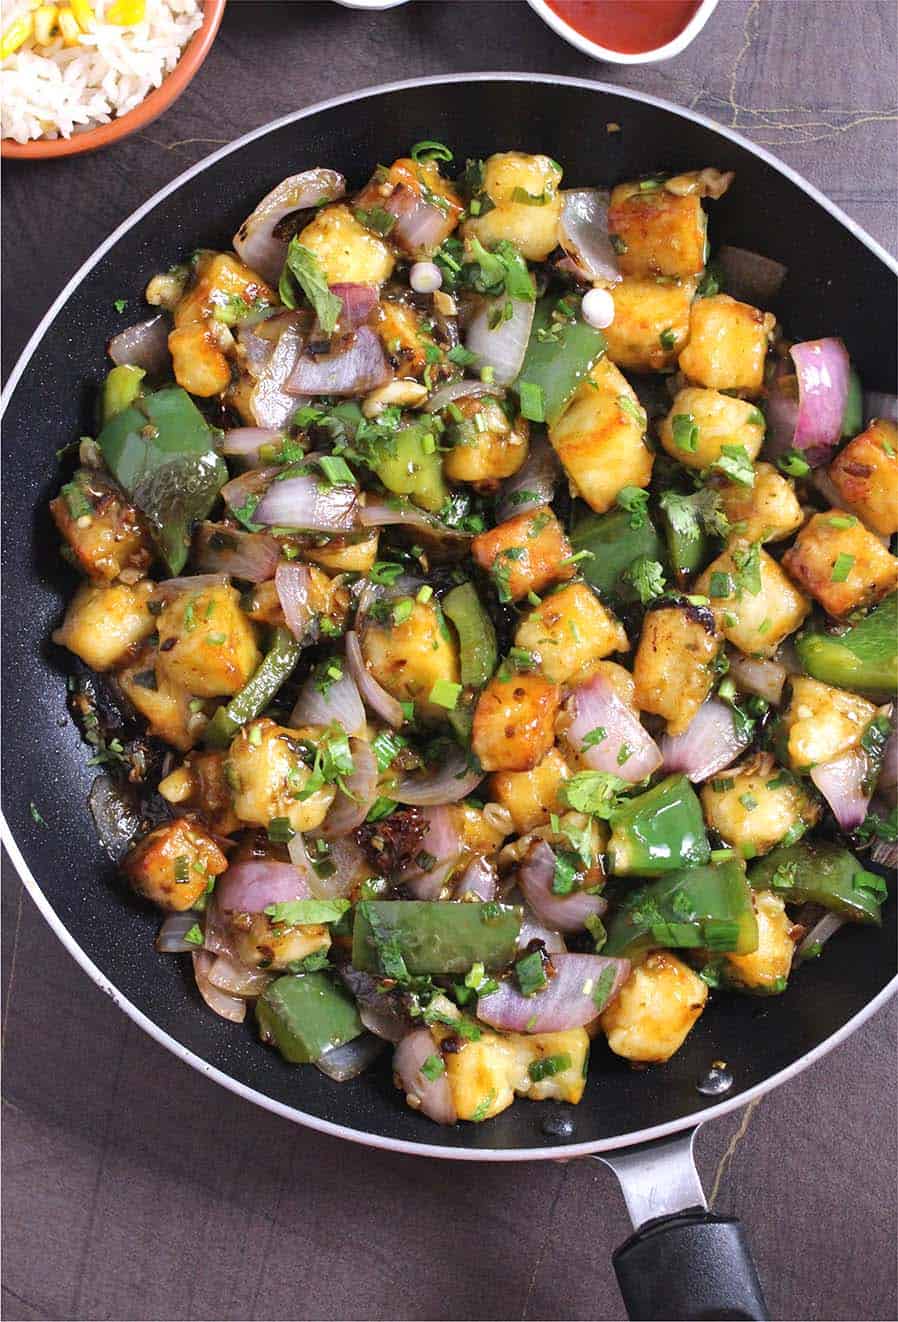 quick and easy paneer dishes, Indian cottage cheese, party food, homemade green chilli sauce